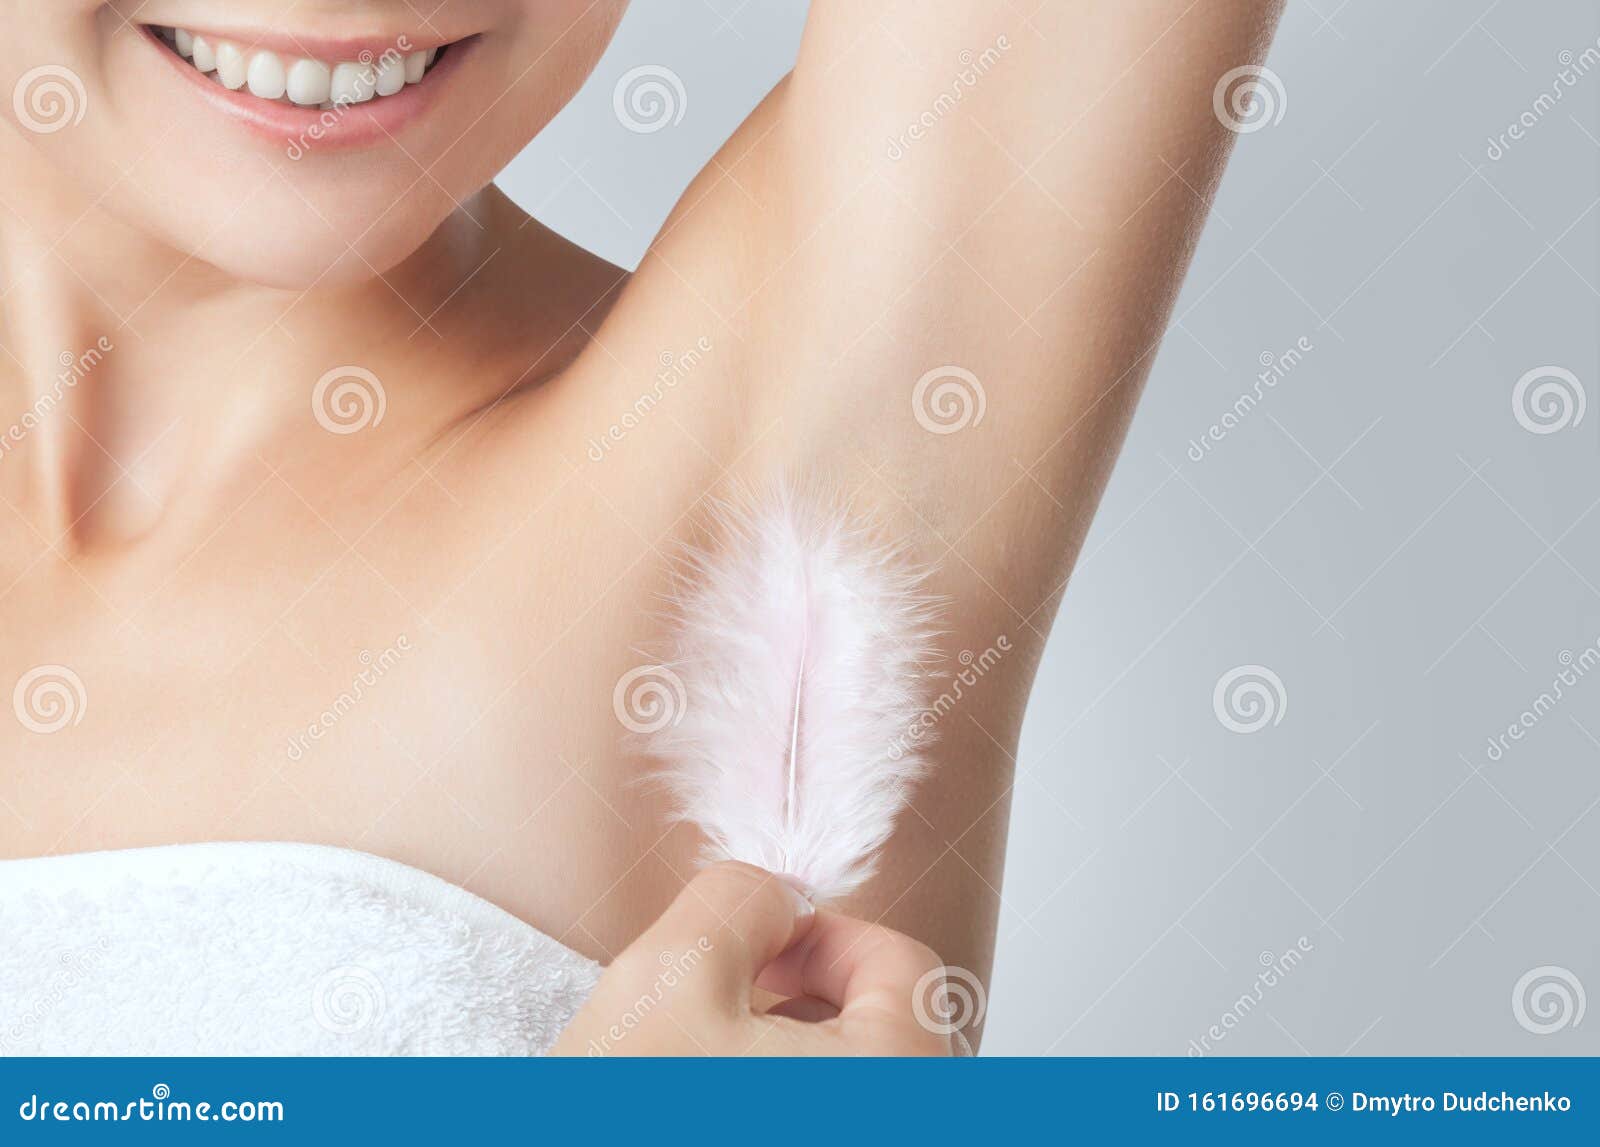 after the botulinum toxin injection procedure. a woman holds a feather in the skin in the armpits, showing dryness and lack of